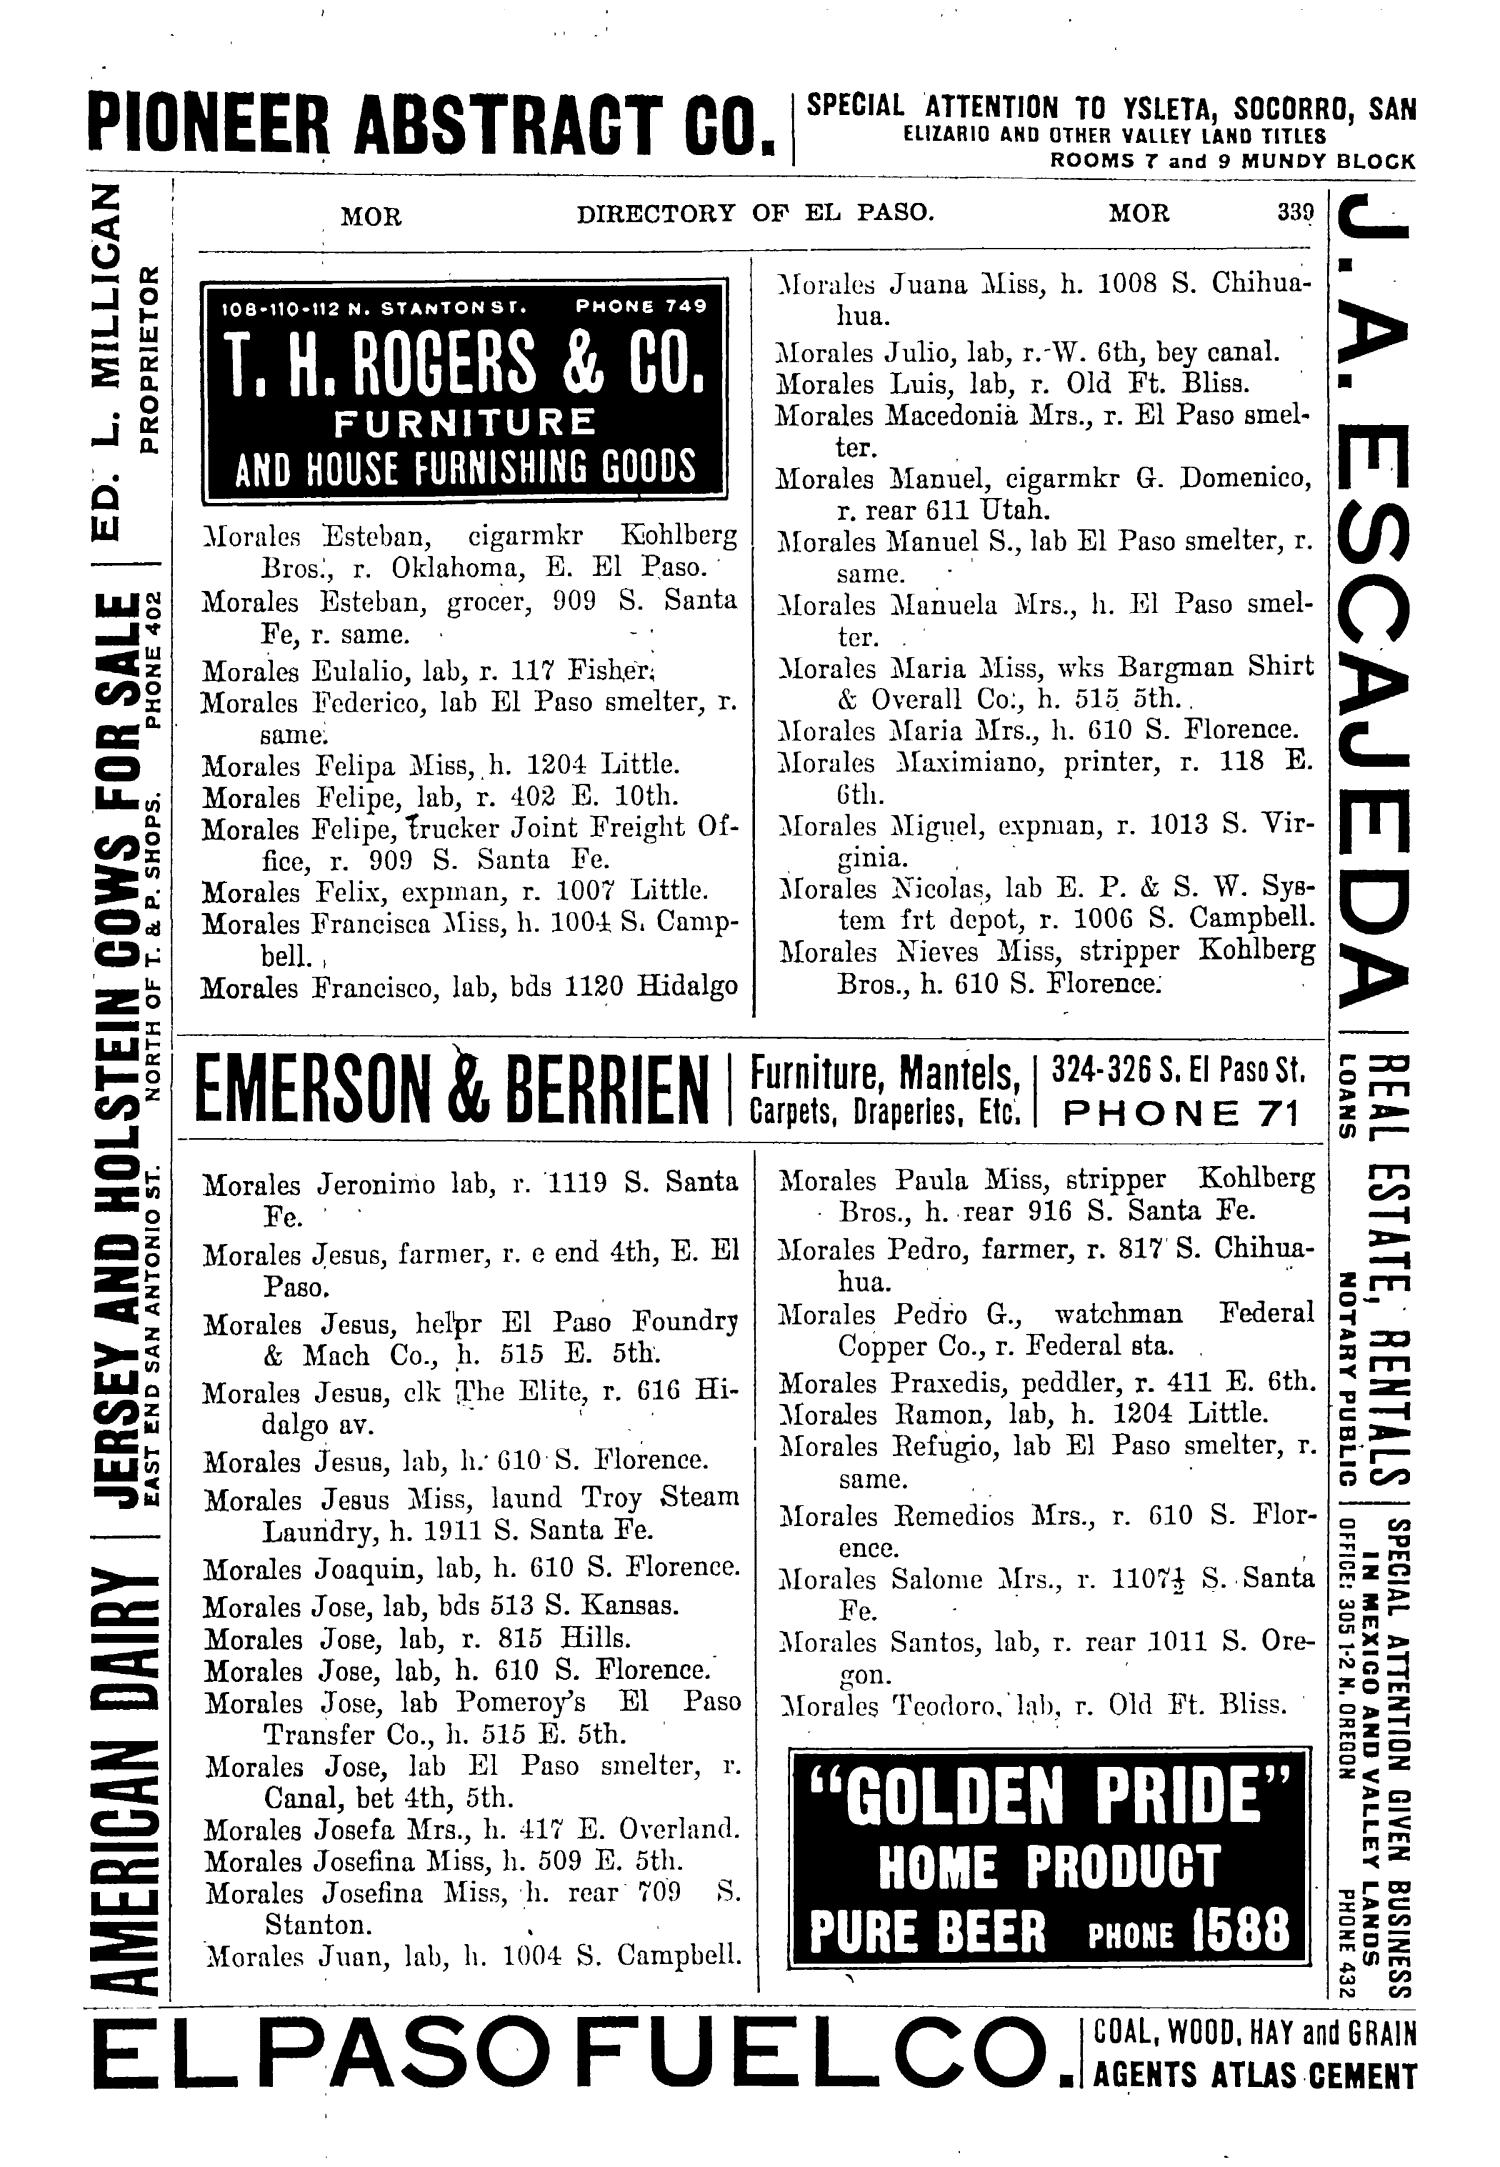 John F. Worley & Co.'s El Paso Directory for 1906
                                                
                                                    339
                                                